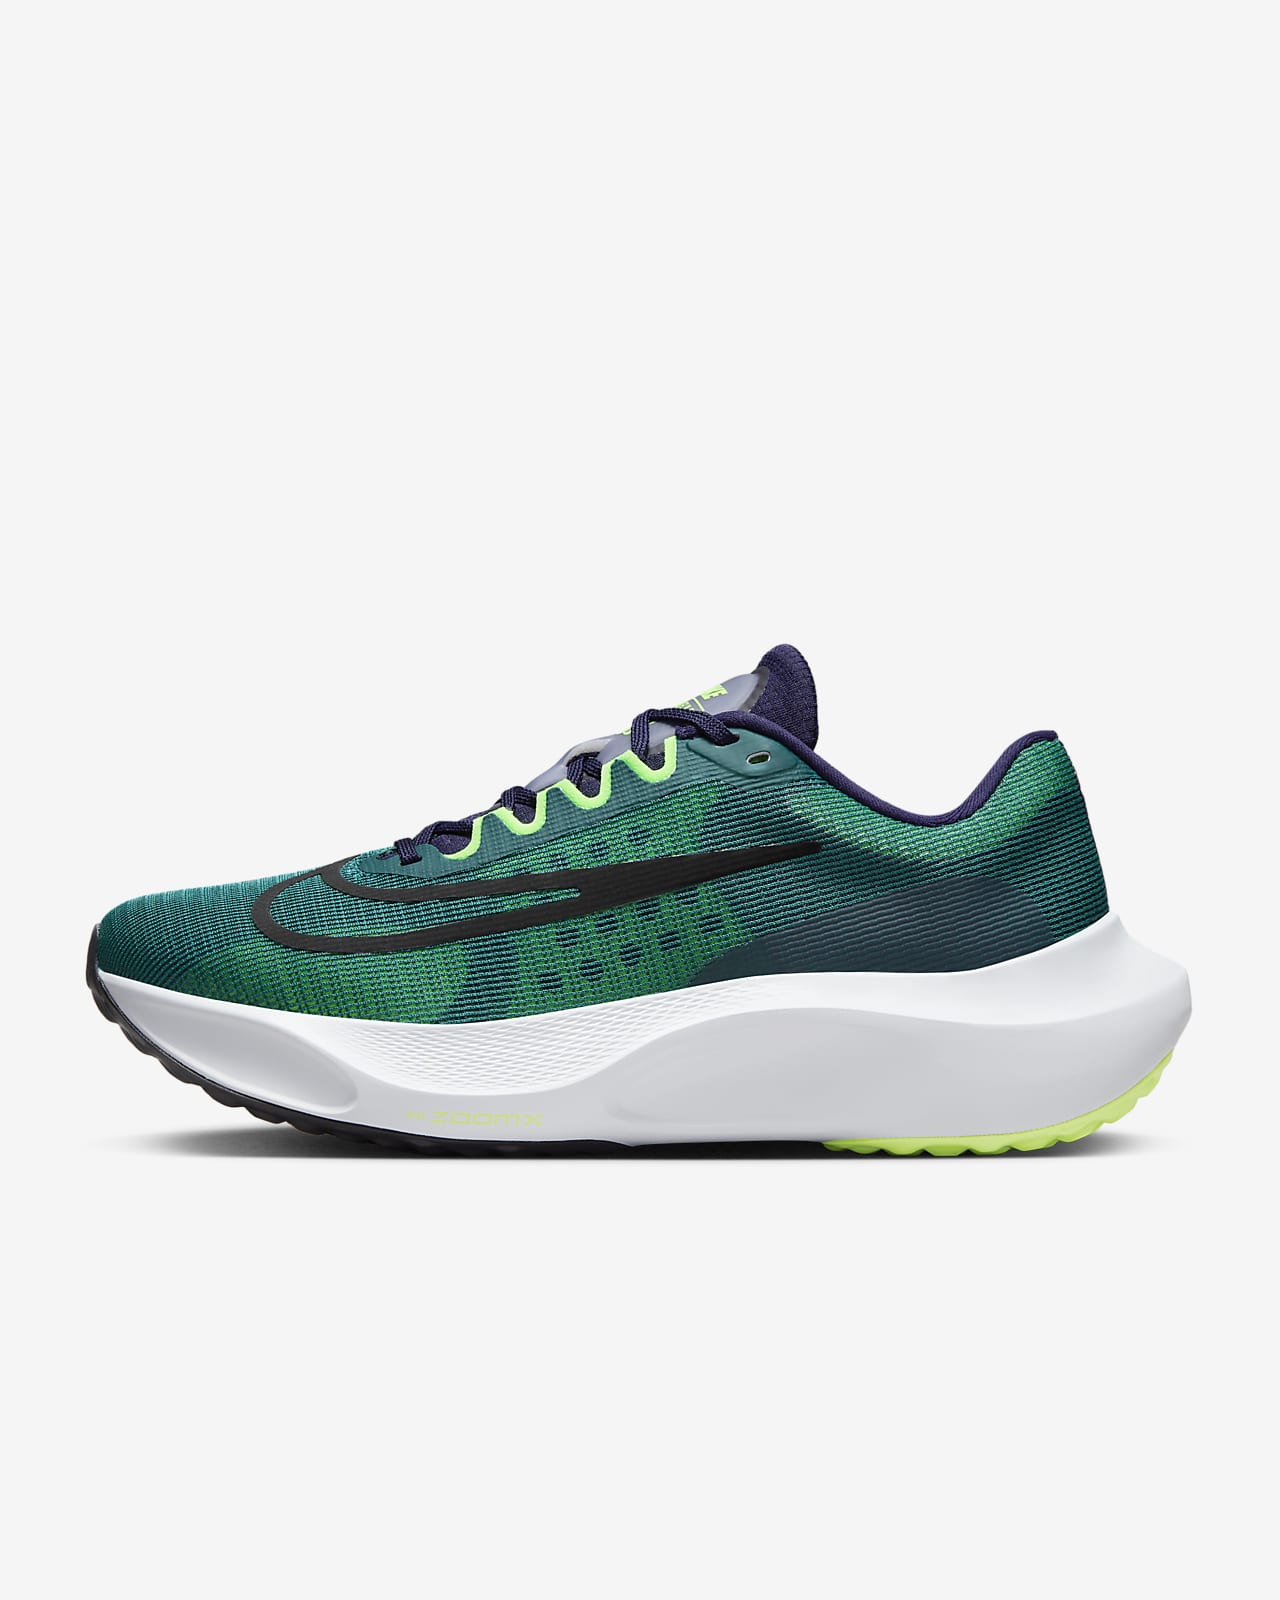 Nike Zoom Fly 5 男子 ZoomX 碳板公路跑步鞋